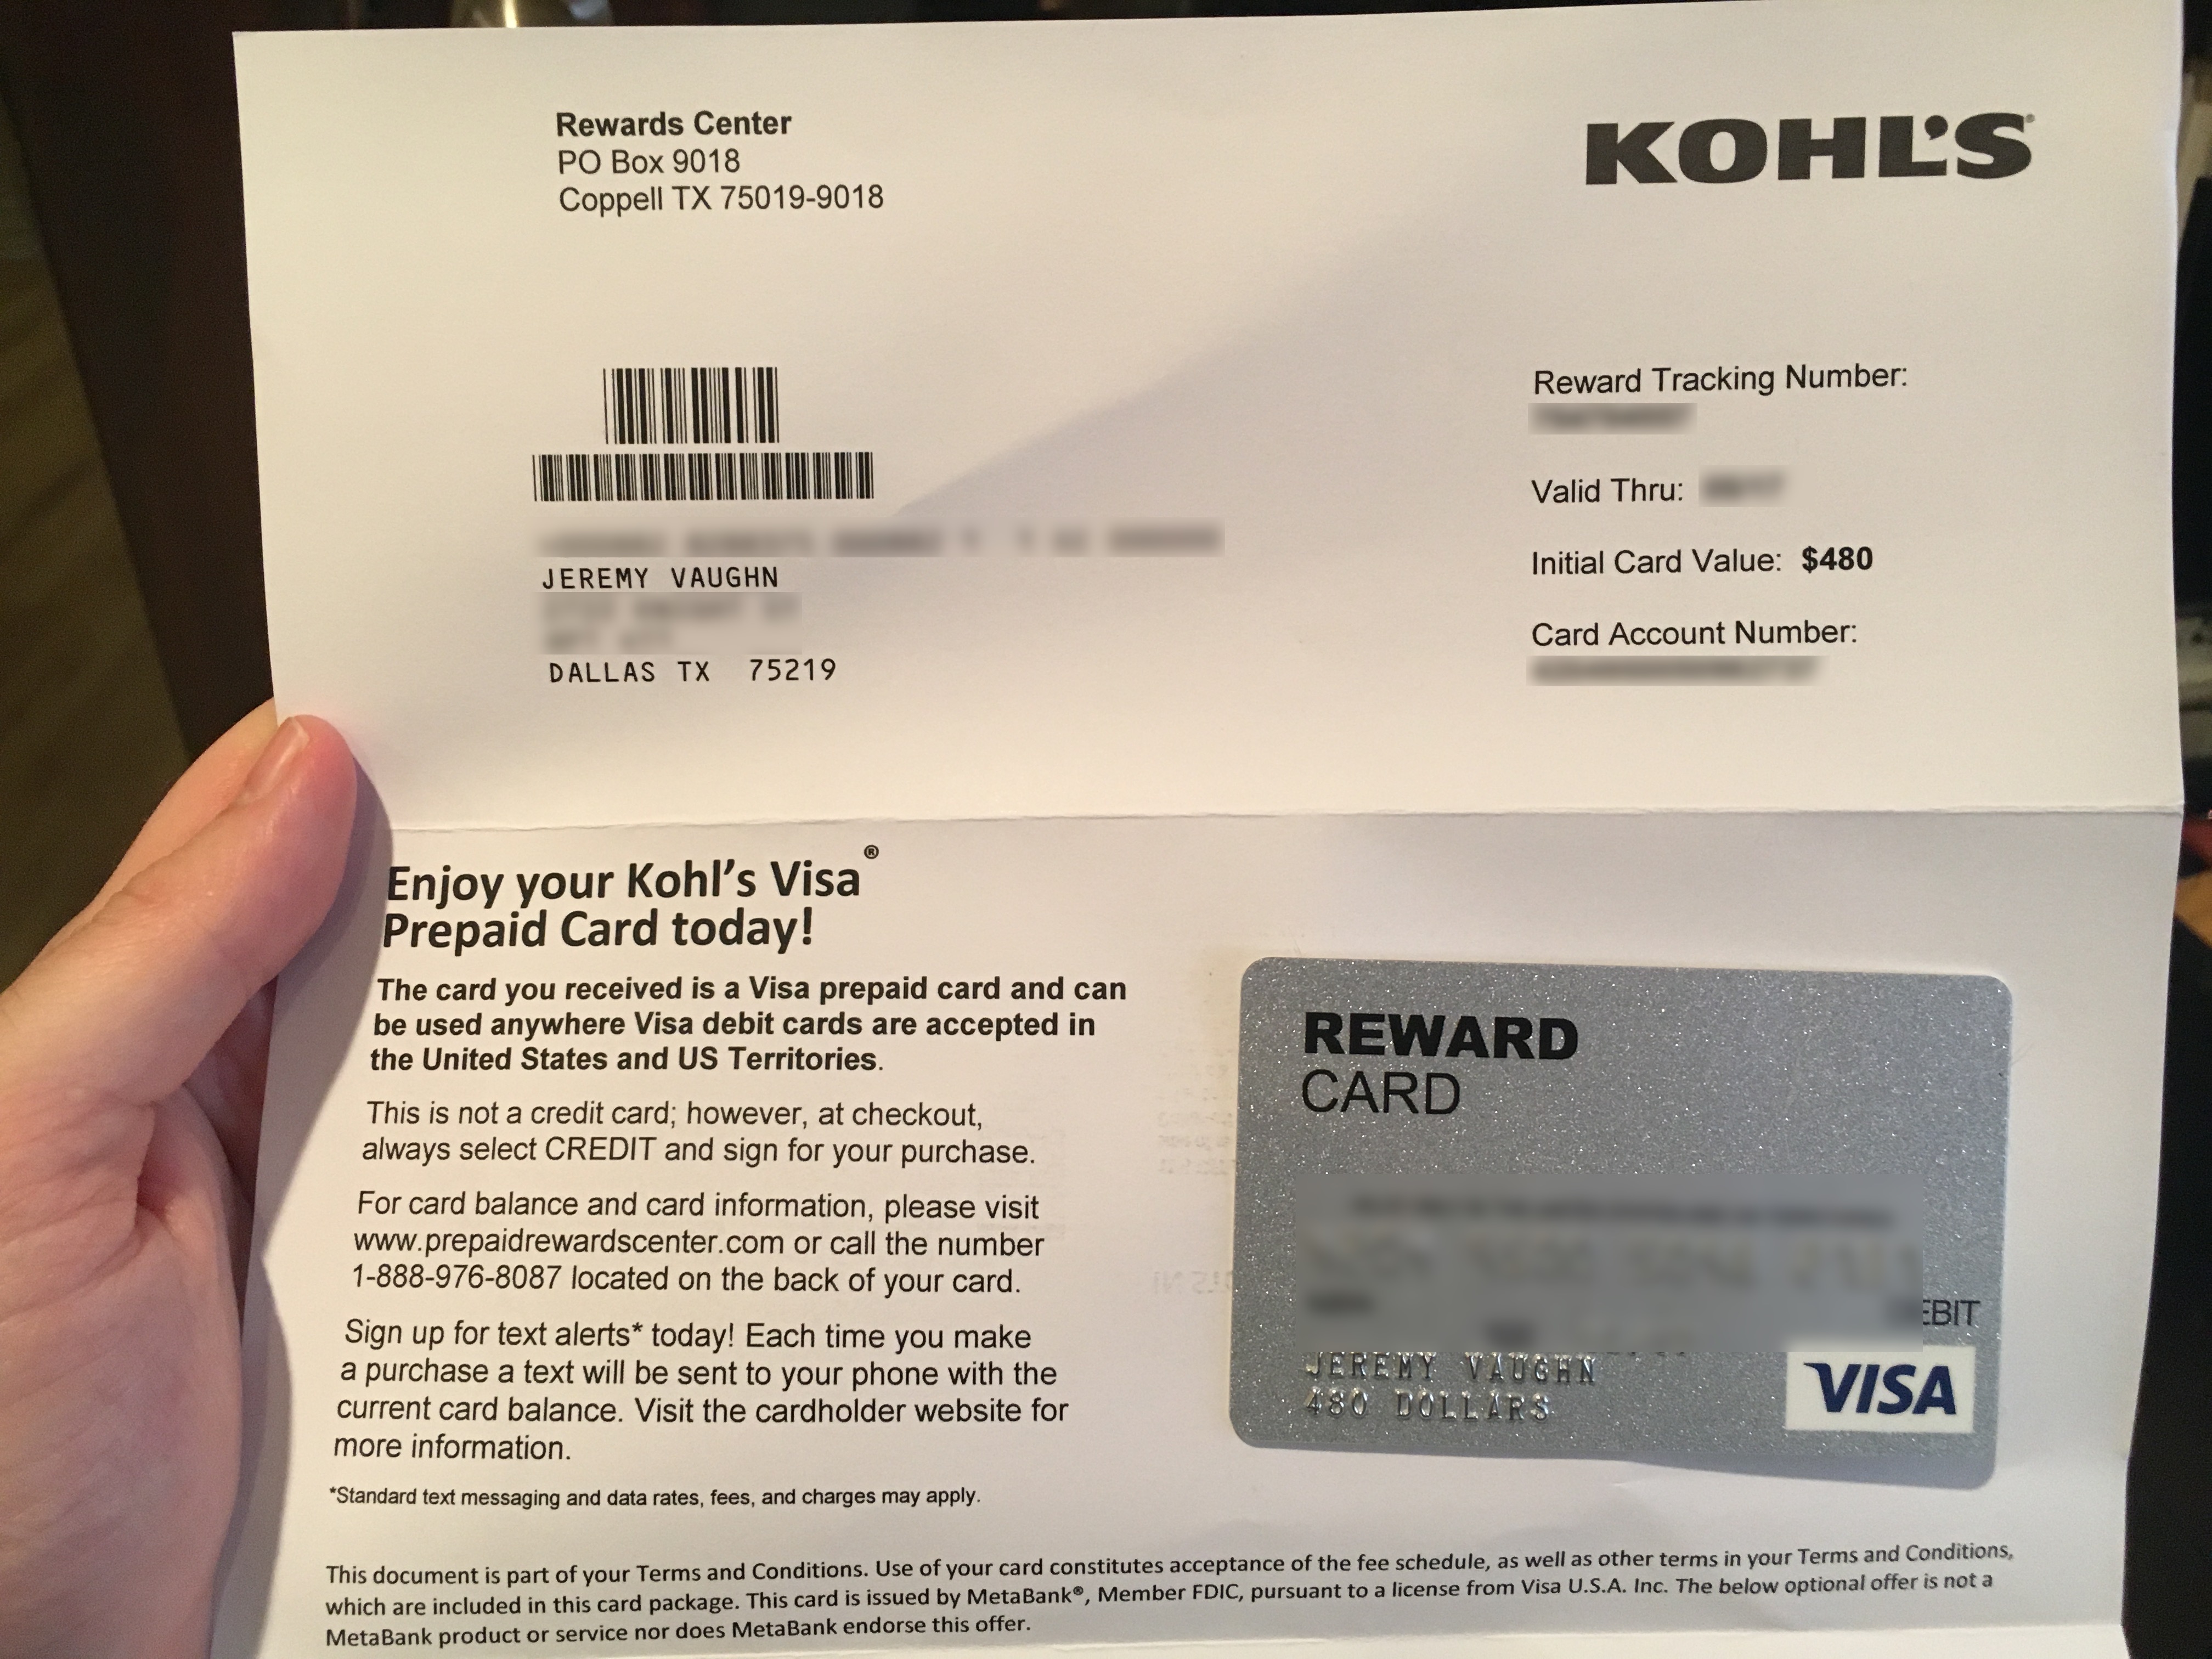 Kohl's Deal Results: What I Learned & How It Turned Out – OUT AND OUT